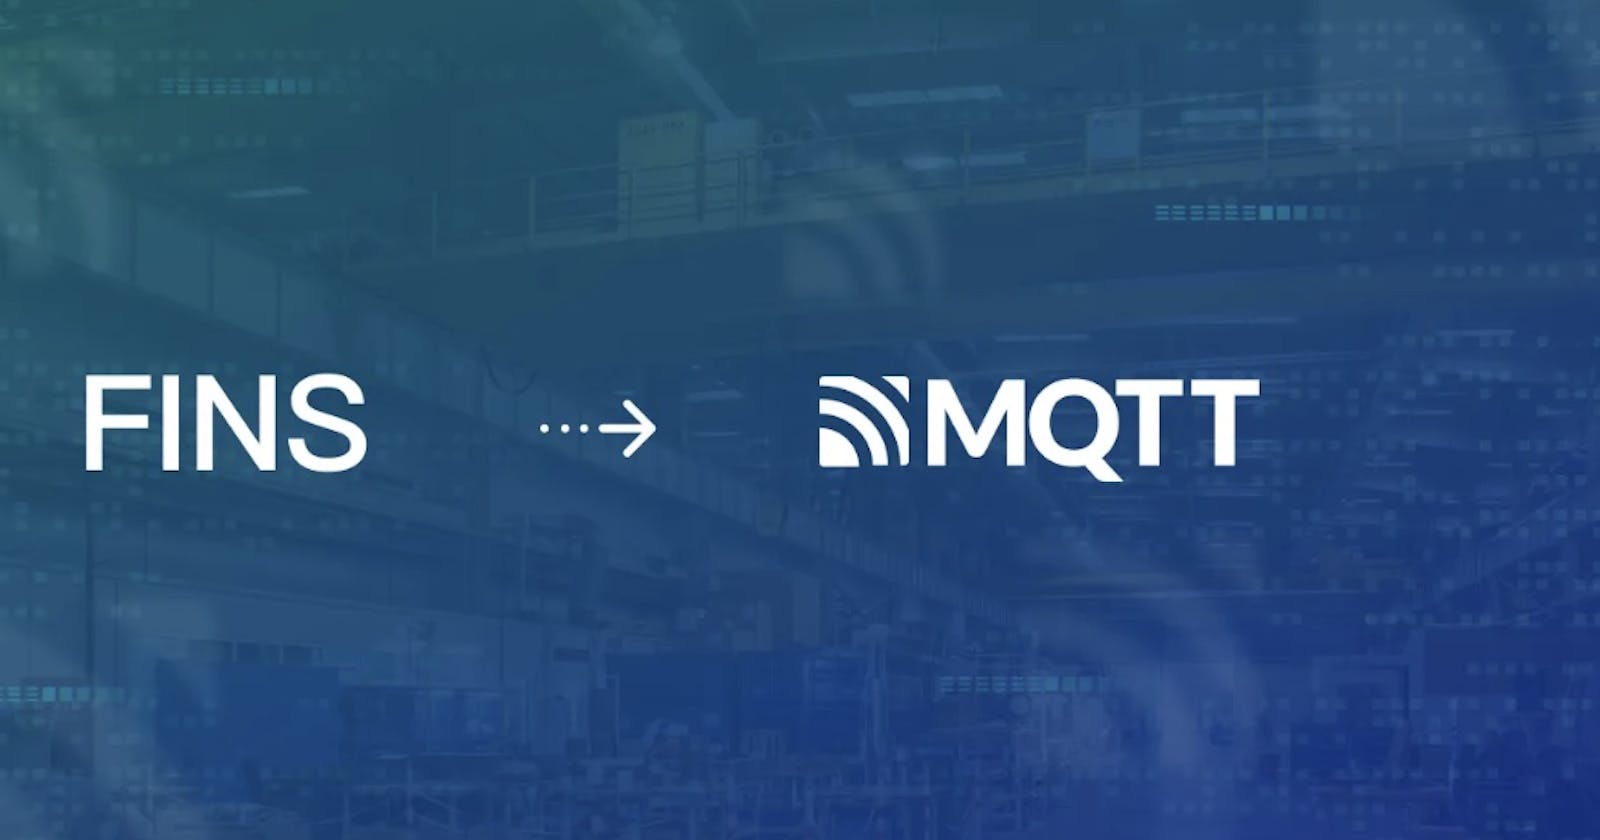 Bridging FINS Data to MQTT: Protocol Explained and Hands-on Tutorial